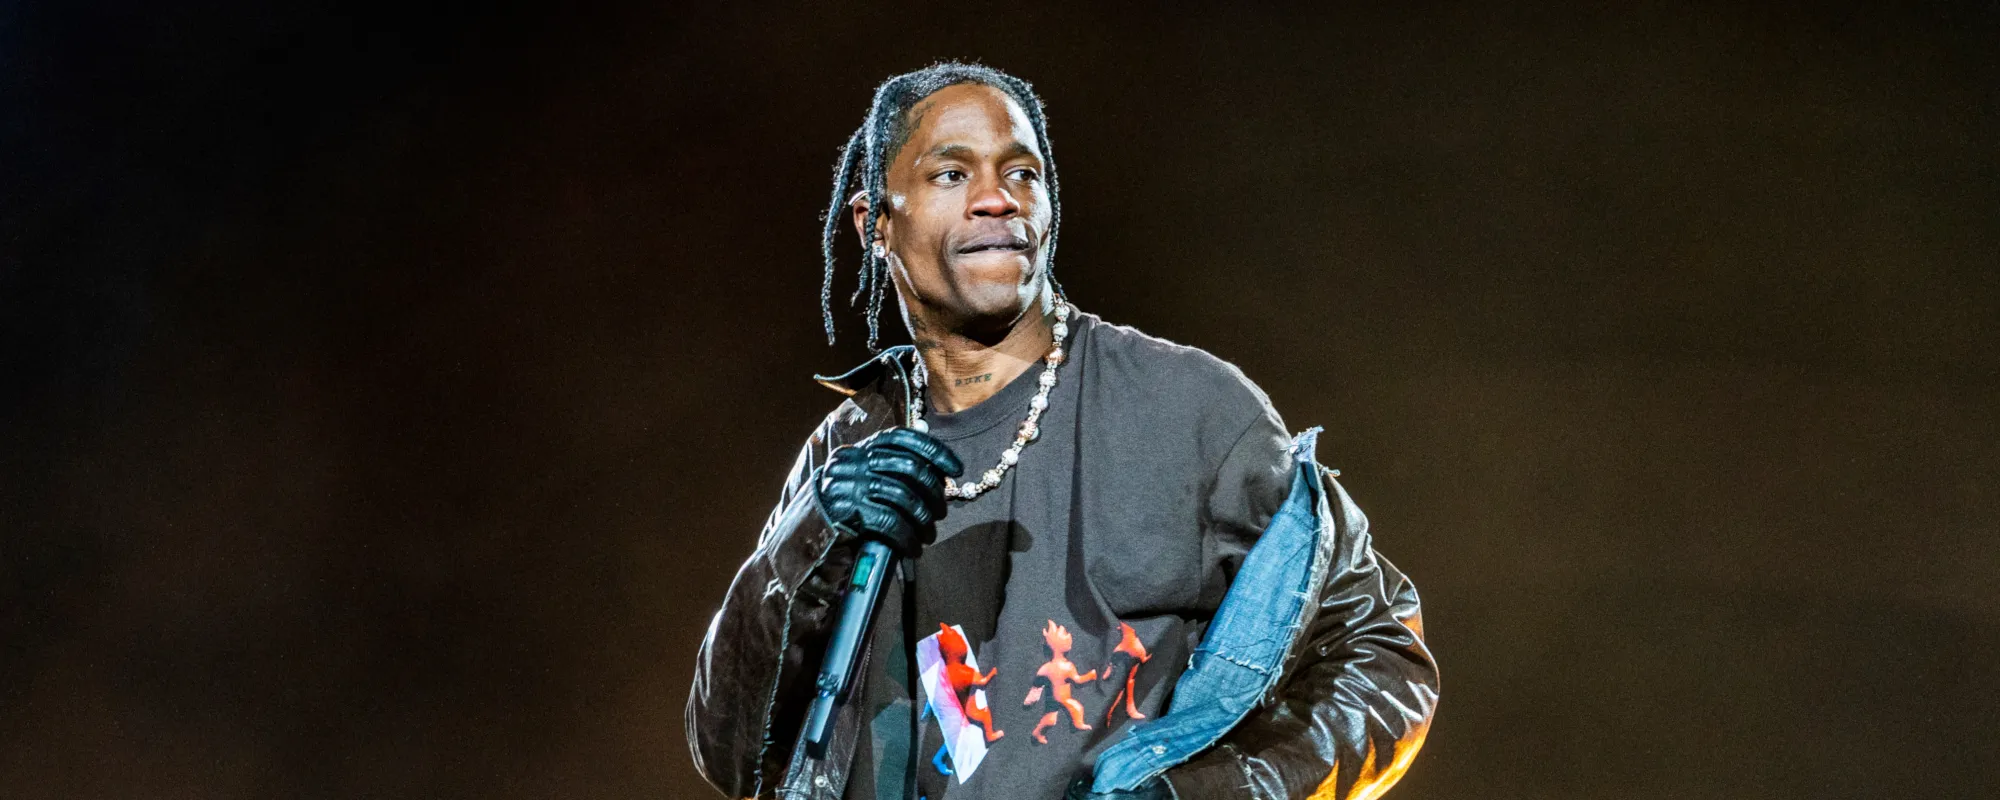 More Fallout from Astroworld: Travis Scott Removed From Coachella, Anheuser-Busch Will No Longer Produce His Seltzer Brand